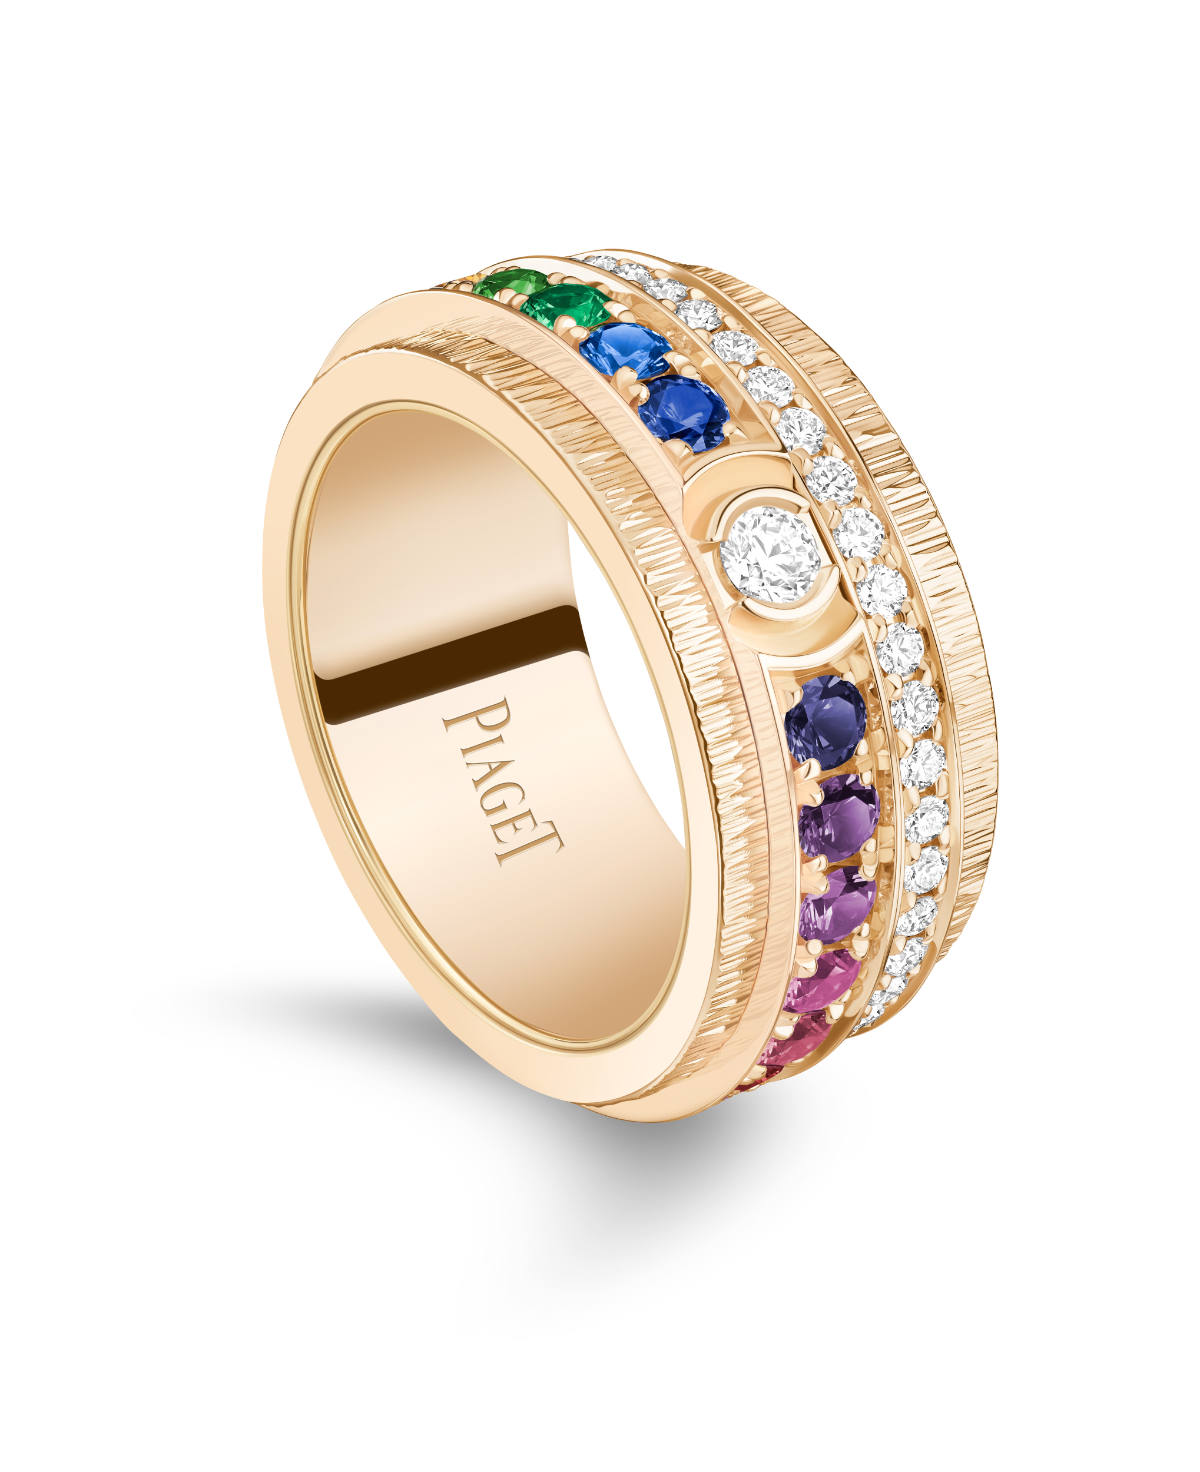 Piaget Presents Its New Collection: The Possession